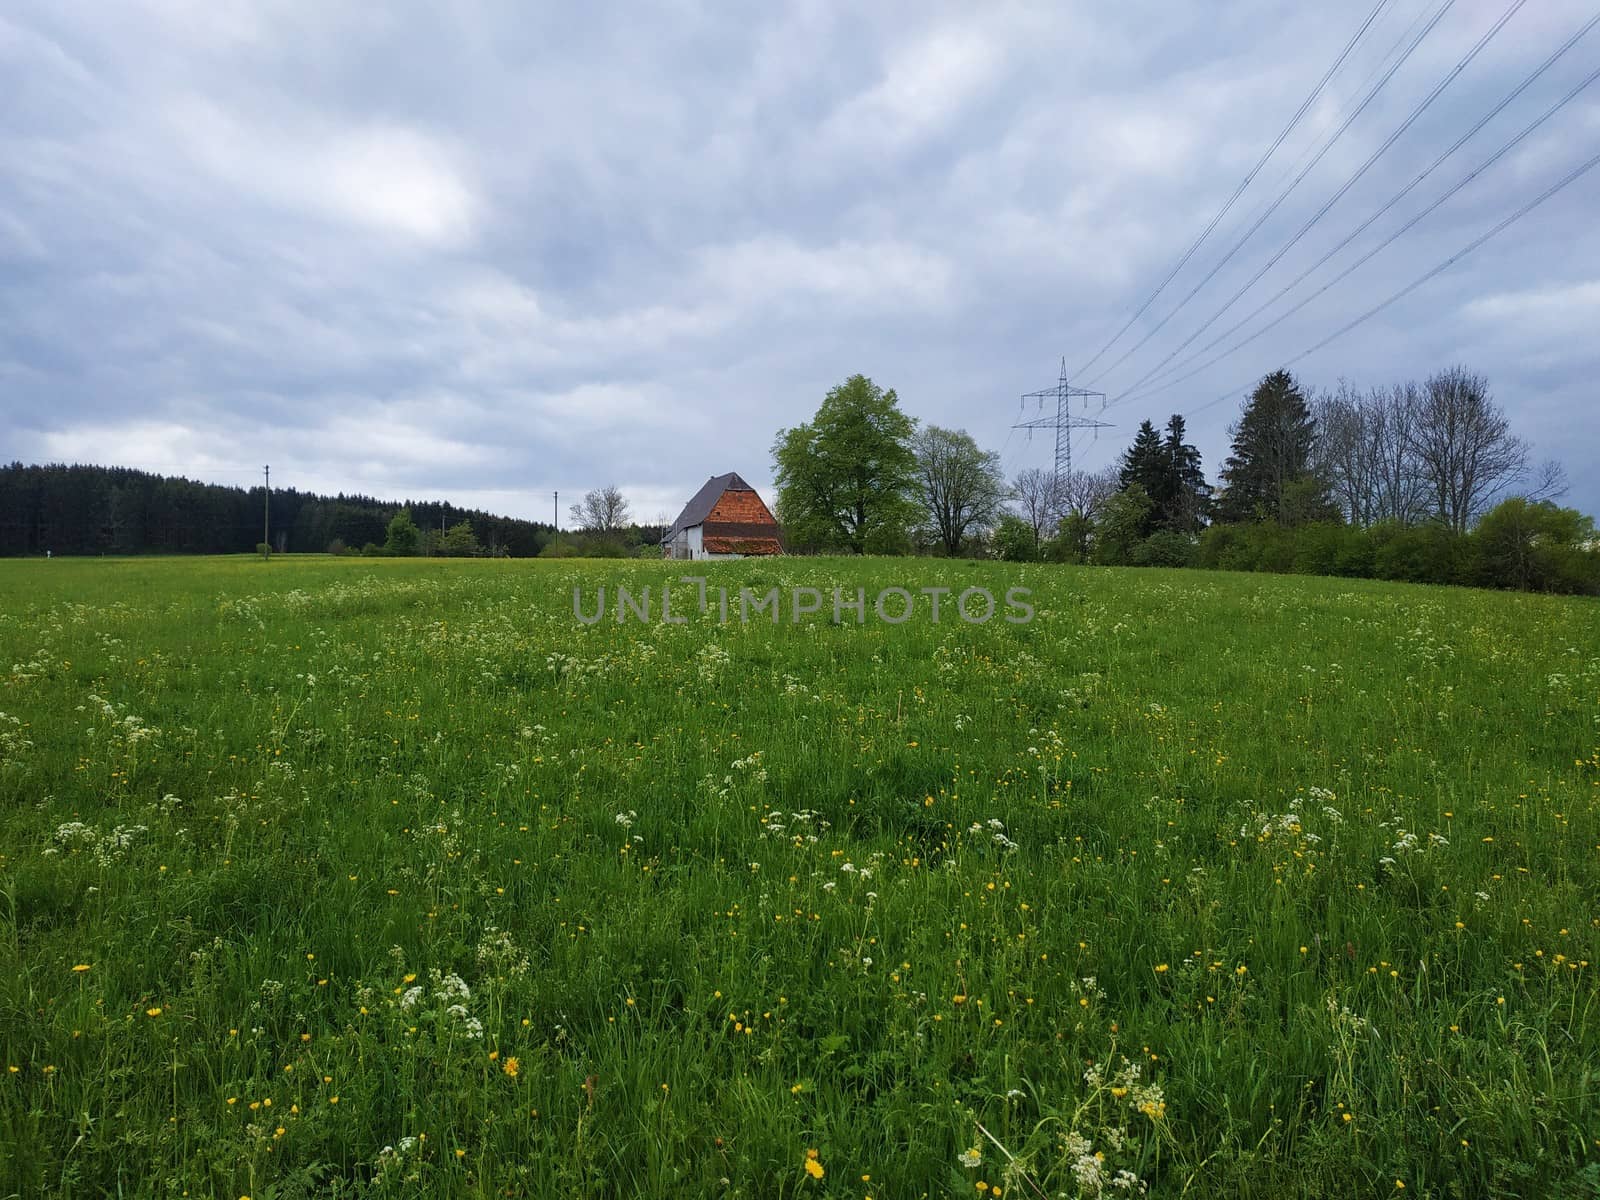 A meadow near the village of Schoemberg on a rainy day